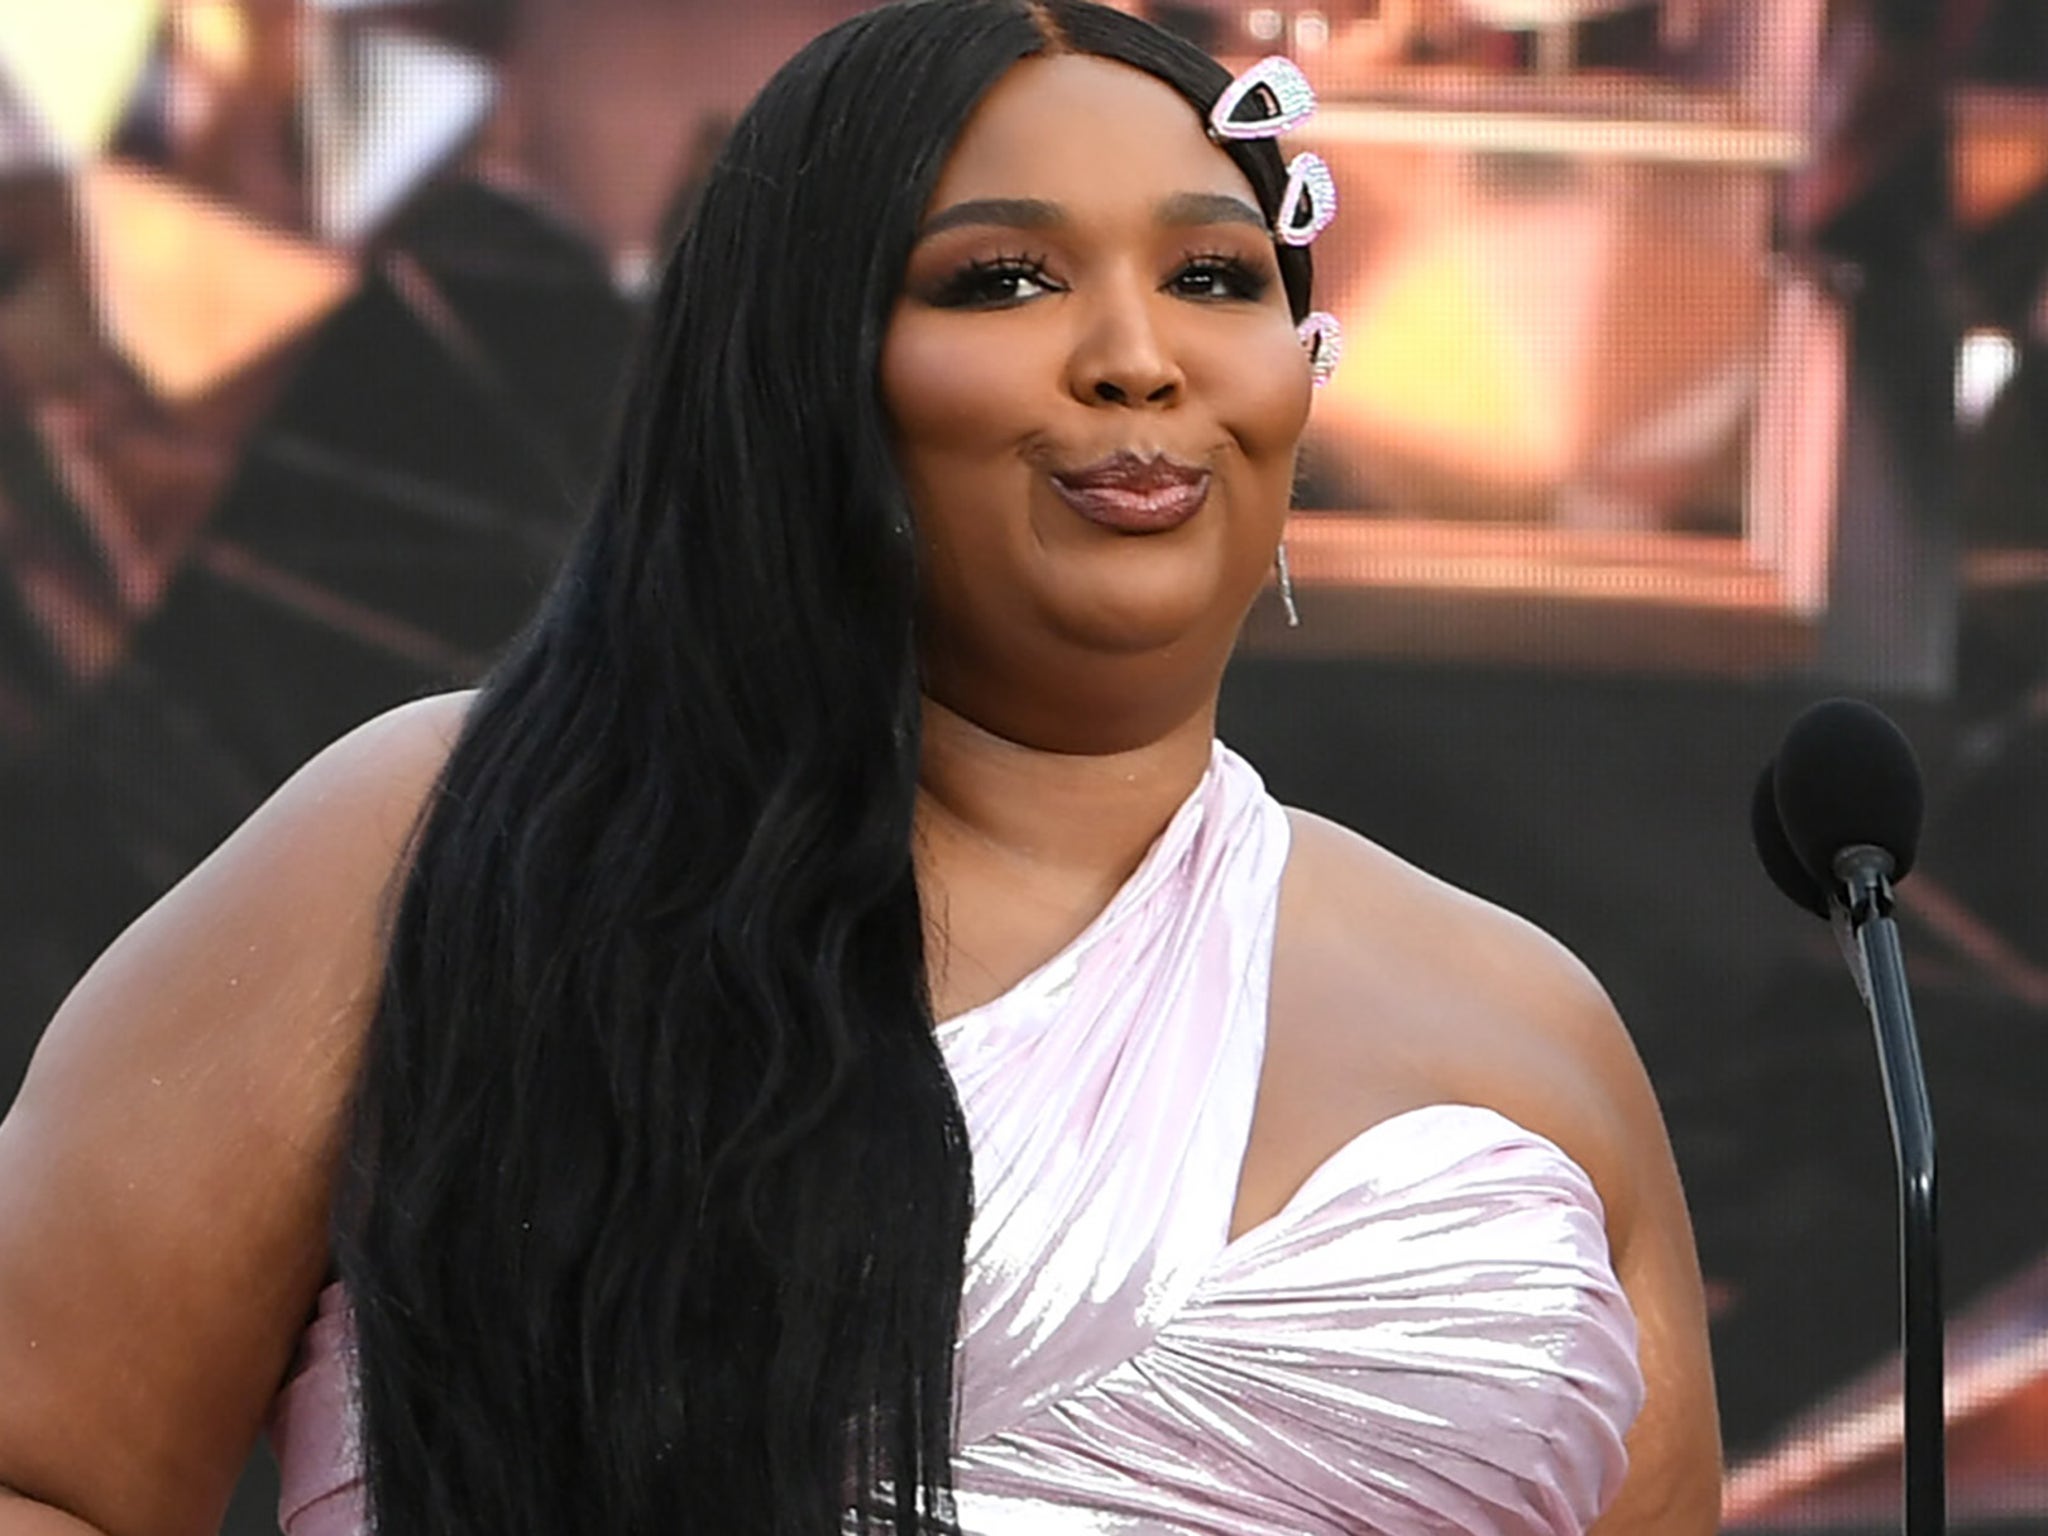 Lizzo Gifts Her Mom a Whole New Wardrobe for Her Birthday in Sweet